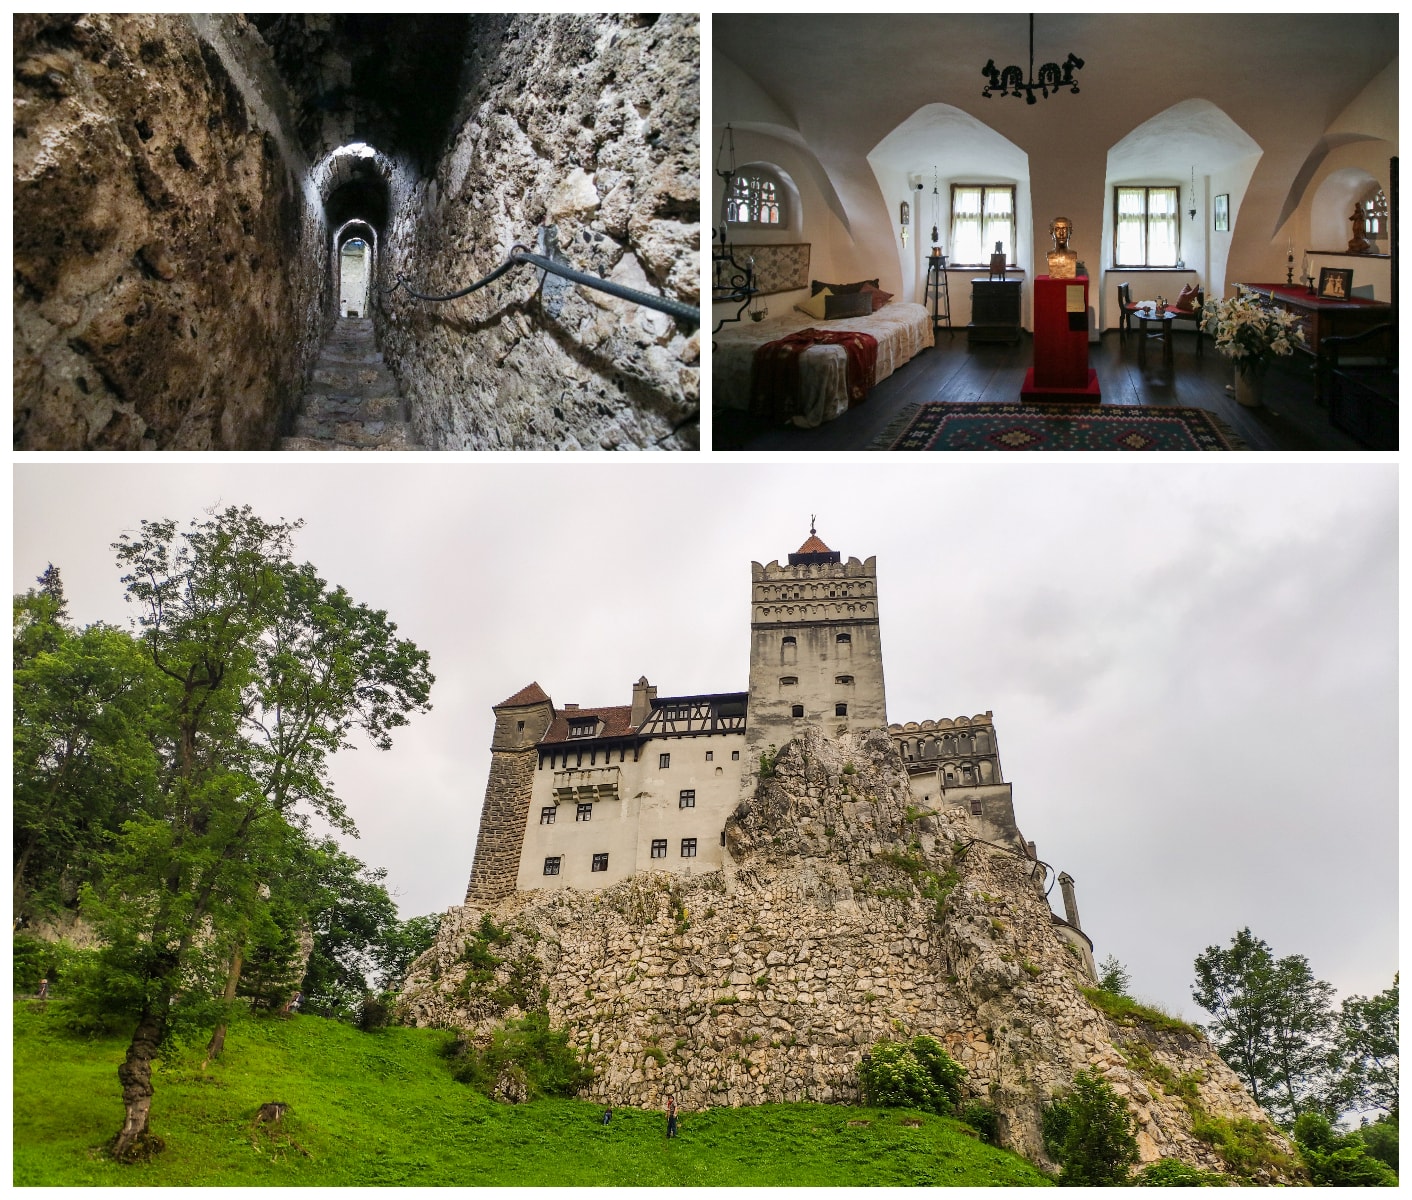 ROMANIA'S CASTLES: FROM LEGENDARY DRACULA'S TO FAIRY TALE